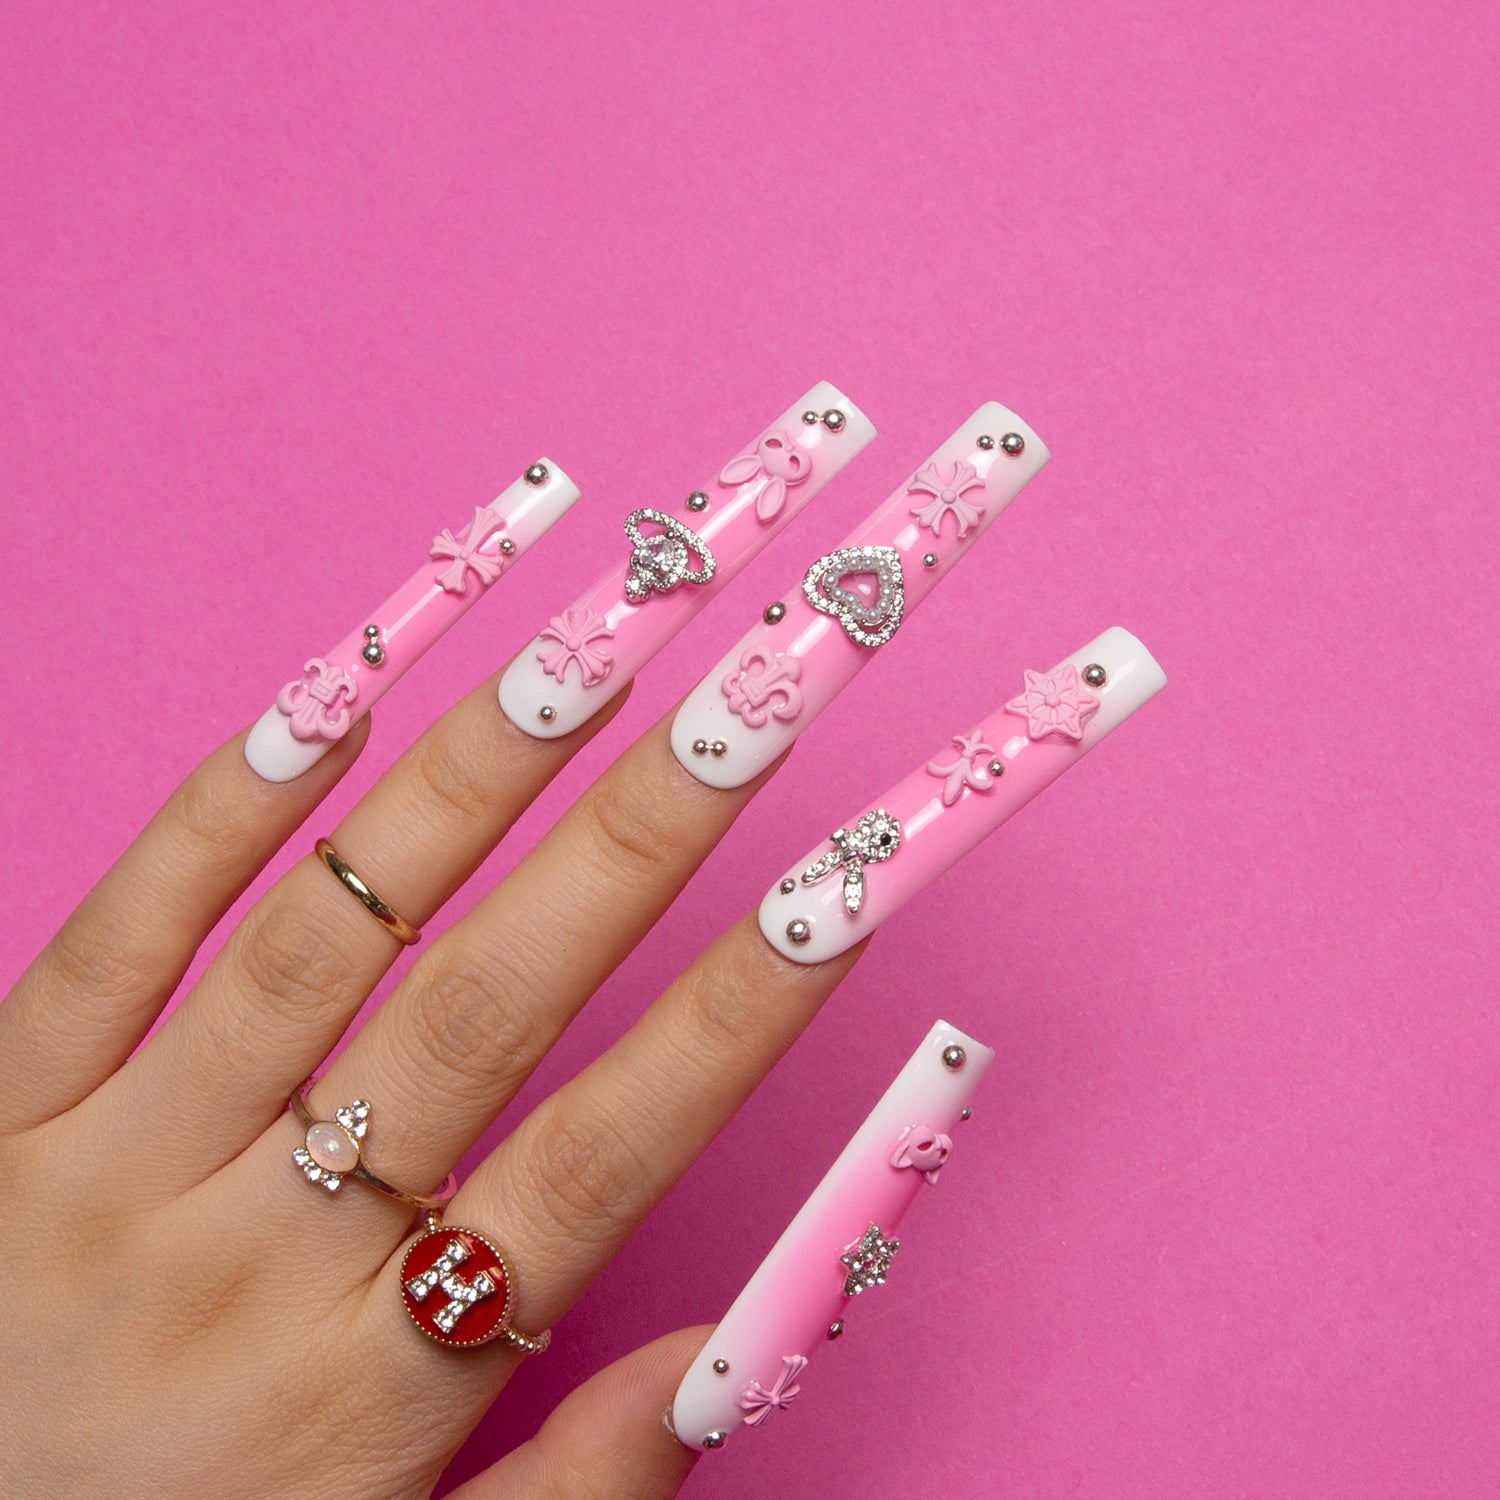 Hand with square gradient pink blush press-on nails adorned with crosses, cat designs, hearts, and planets on a pink background, showcasing whimsical and romantic nail art.